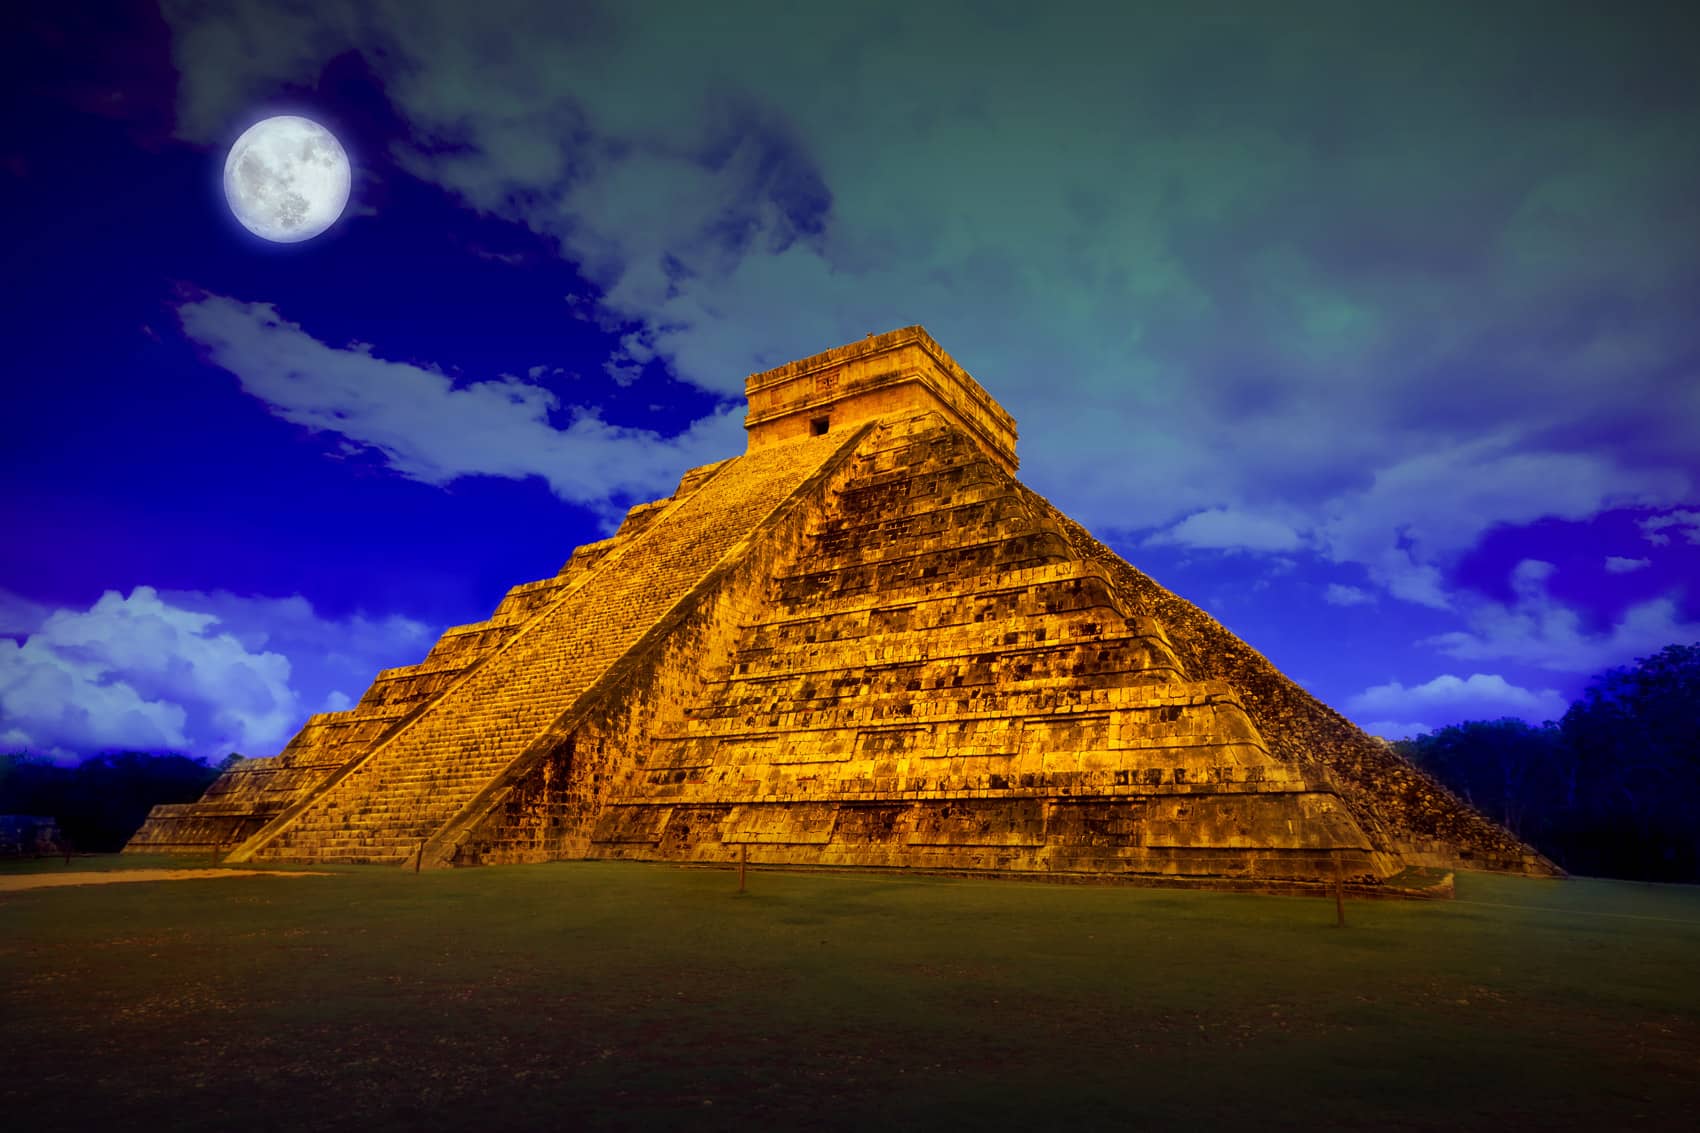 Mexico’s most famous archaeological site